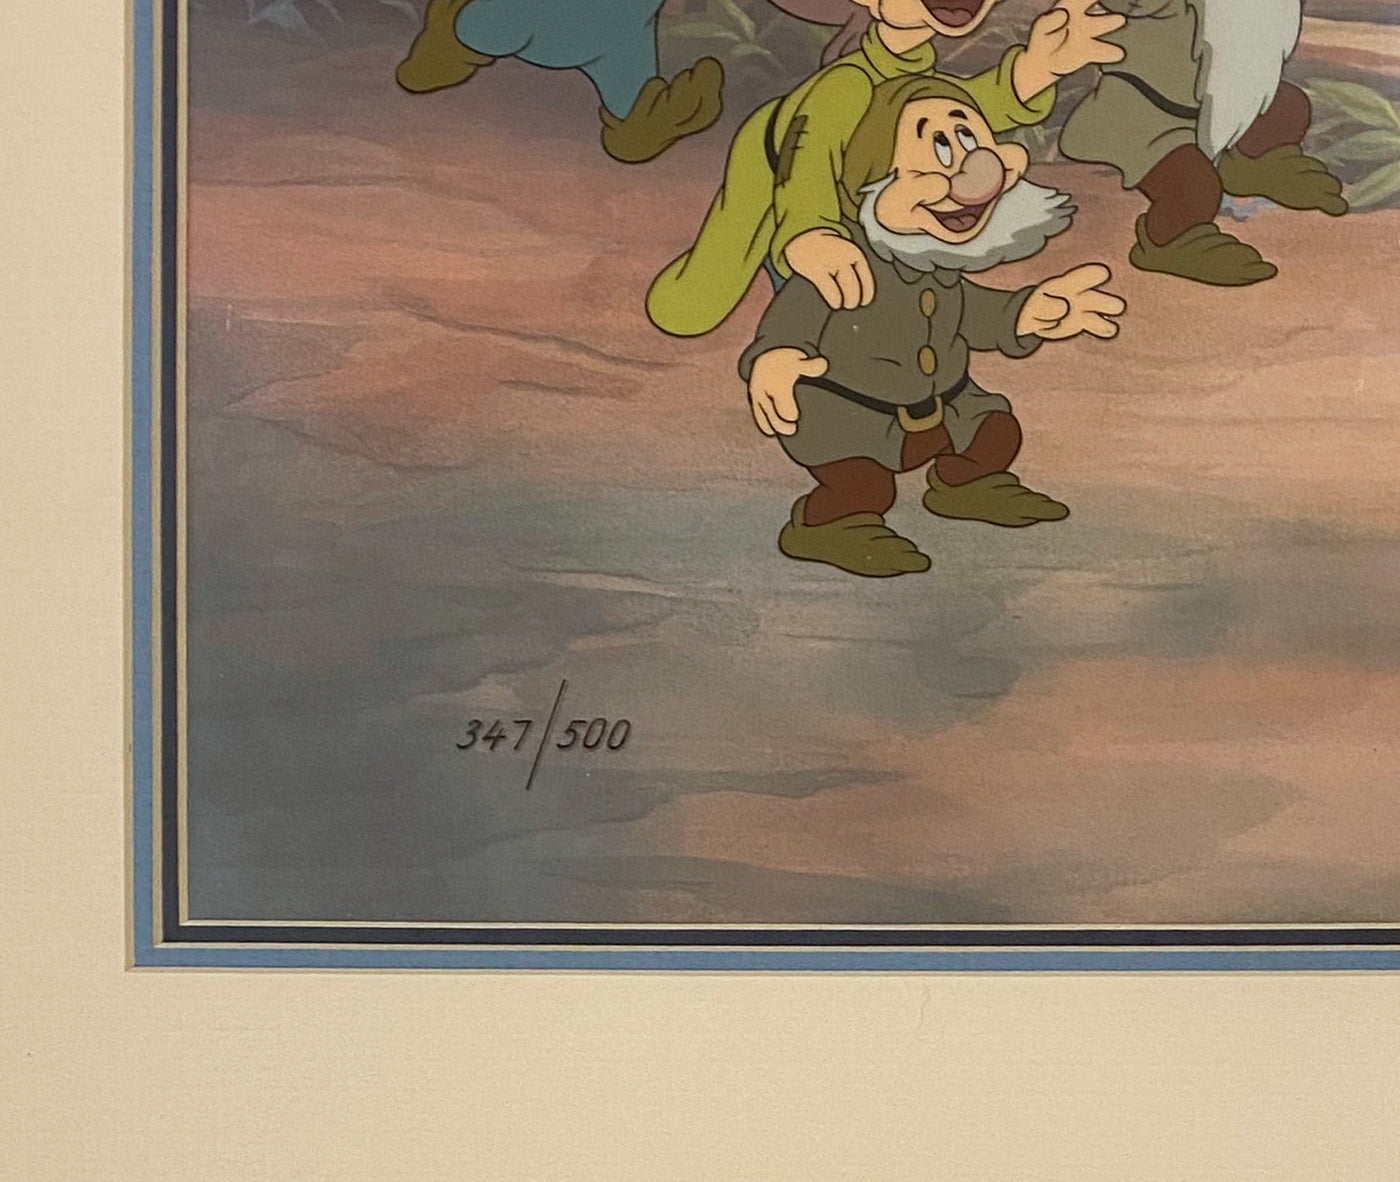 Original Walt Disney Limited Edition Cel "Snow White, Prince and Dwarfs" from Snow White and the Seven Dwarfs